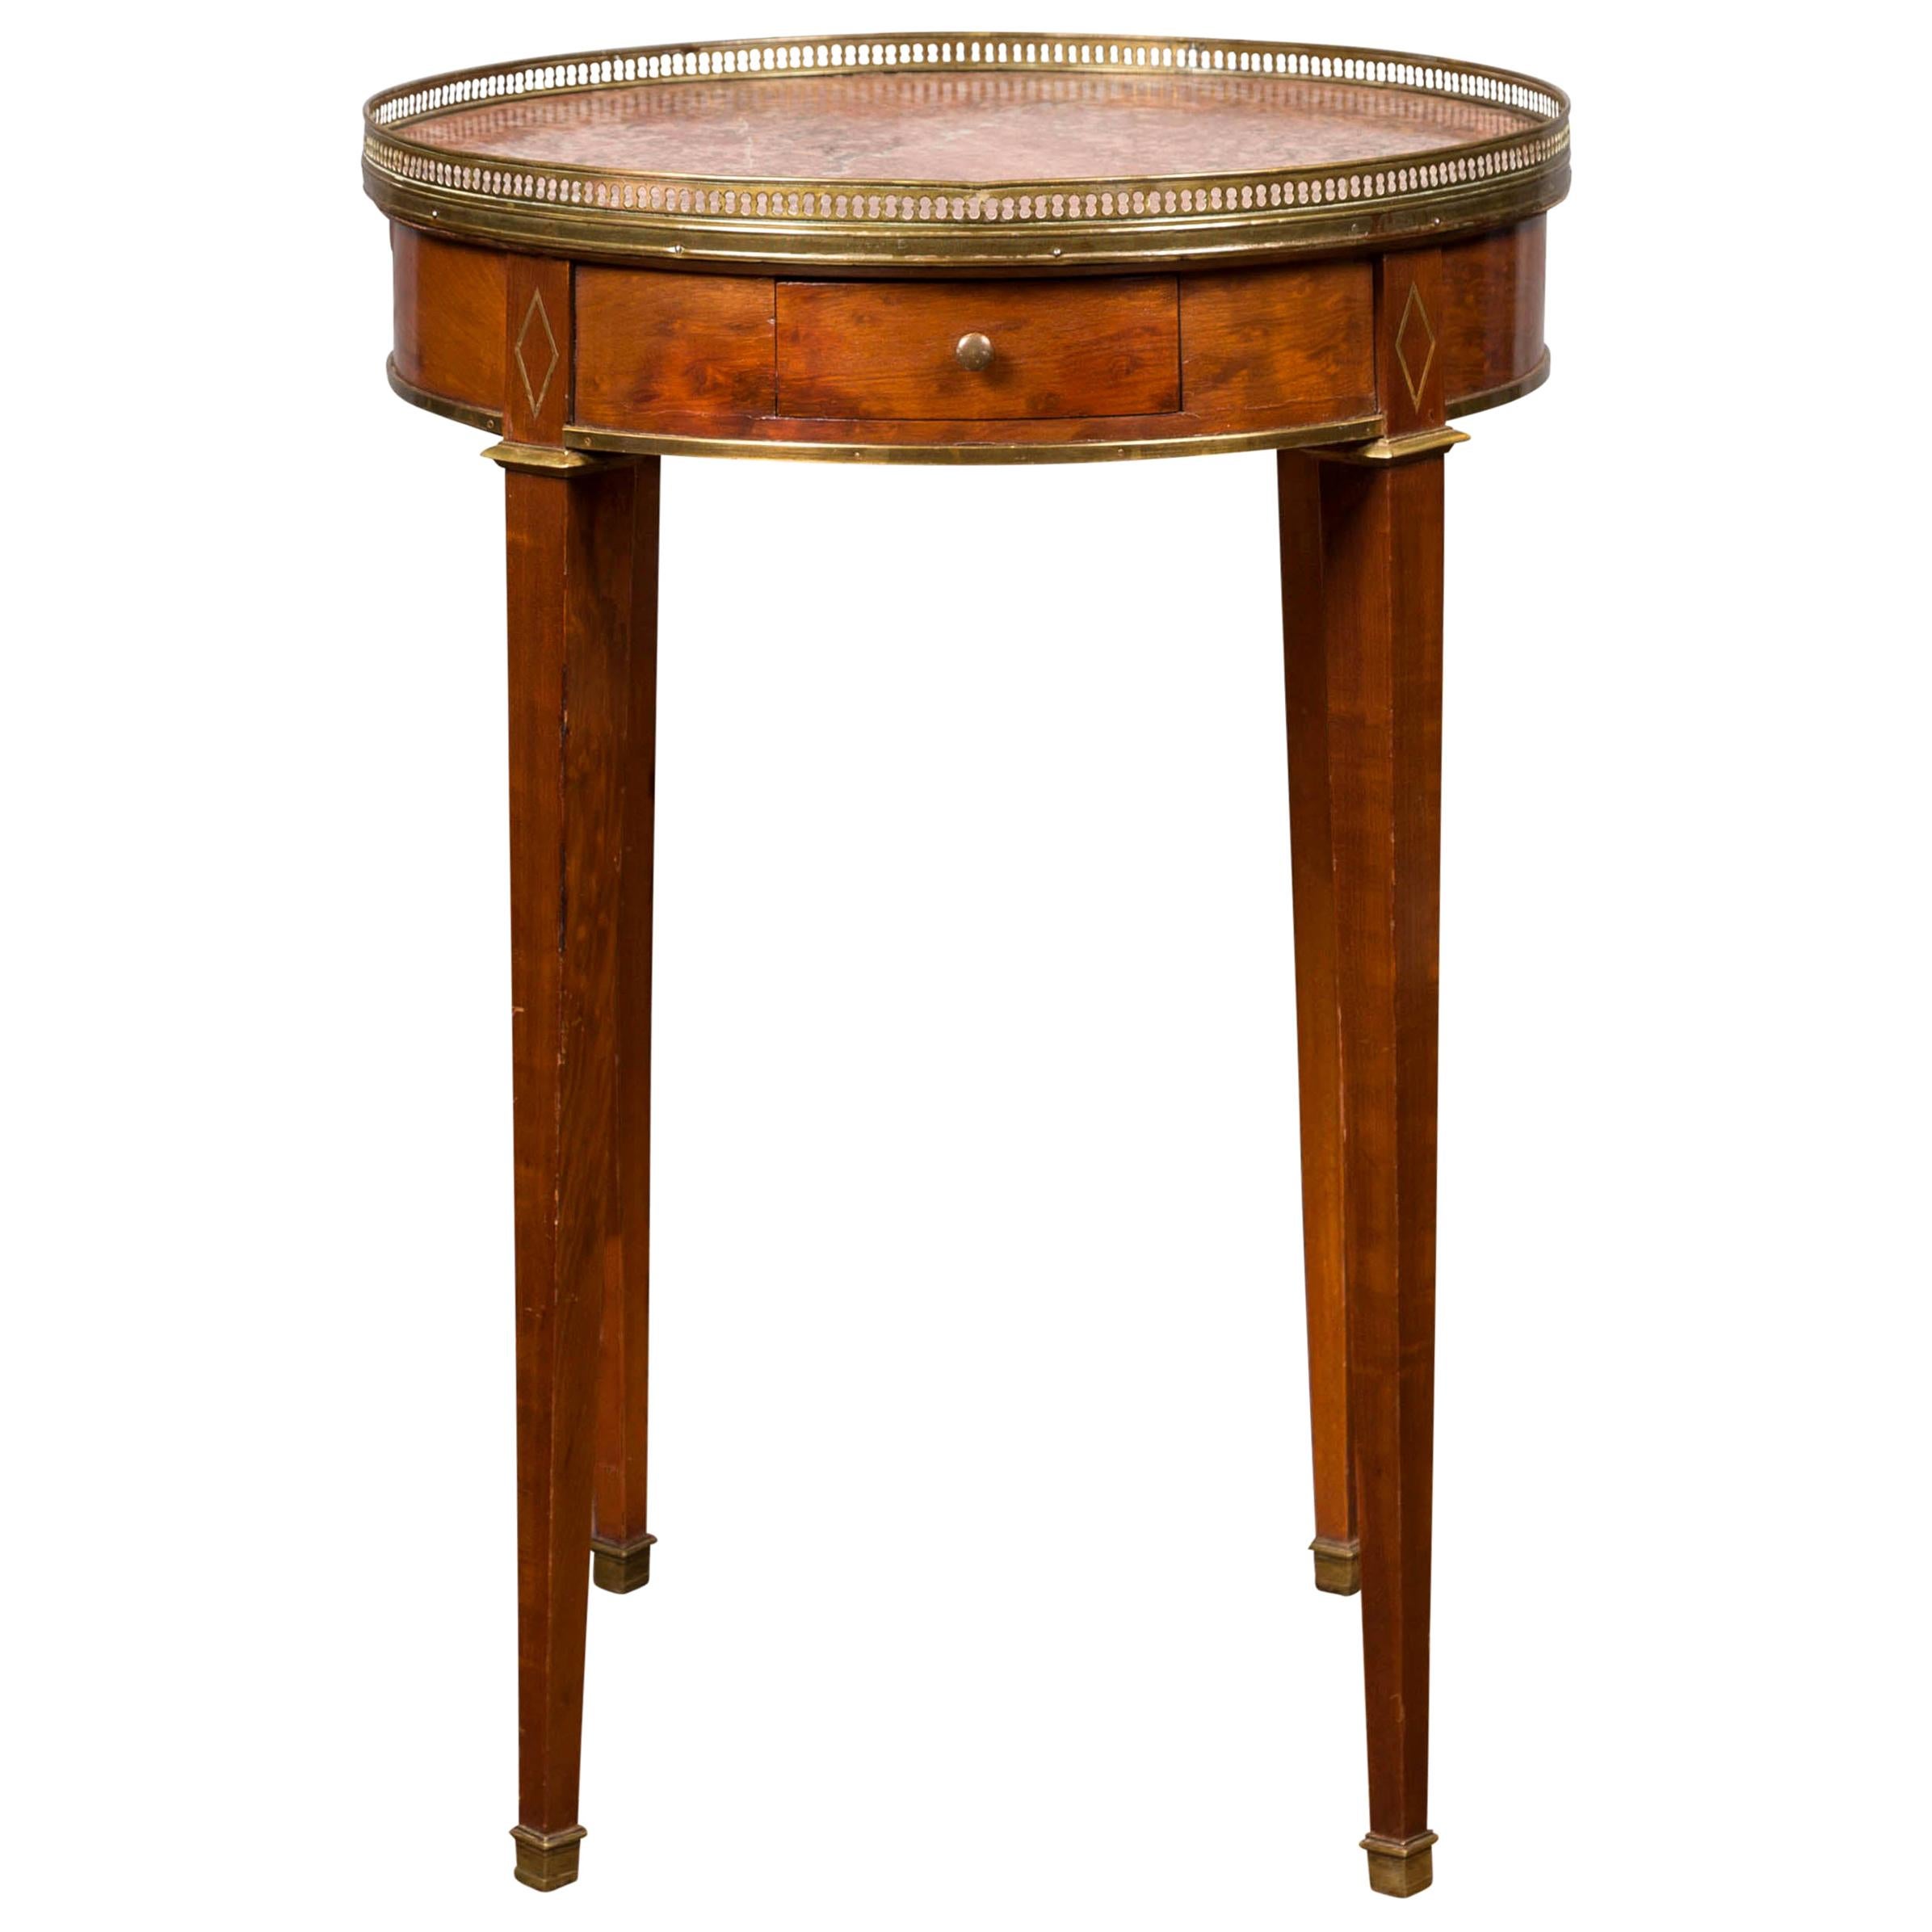 French 1870s Empire Style Round Table with Marble Top, Brass Gallery and Drawer For Sale